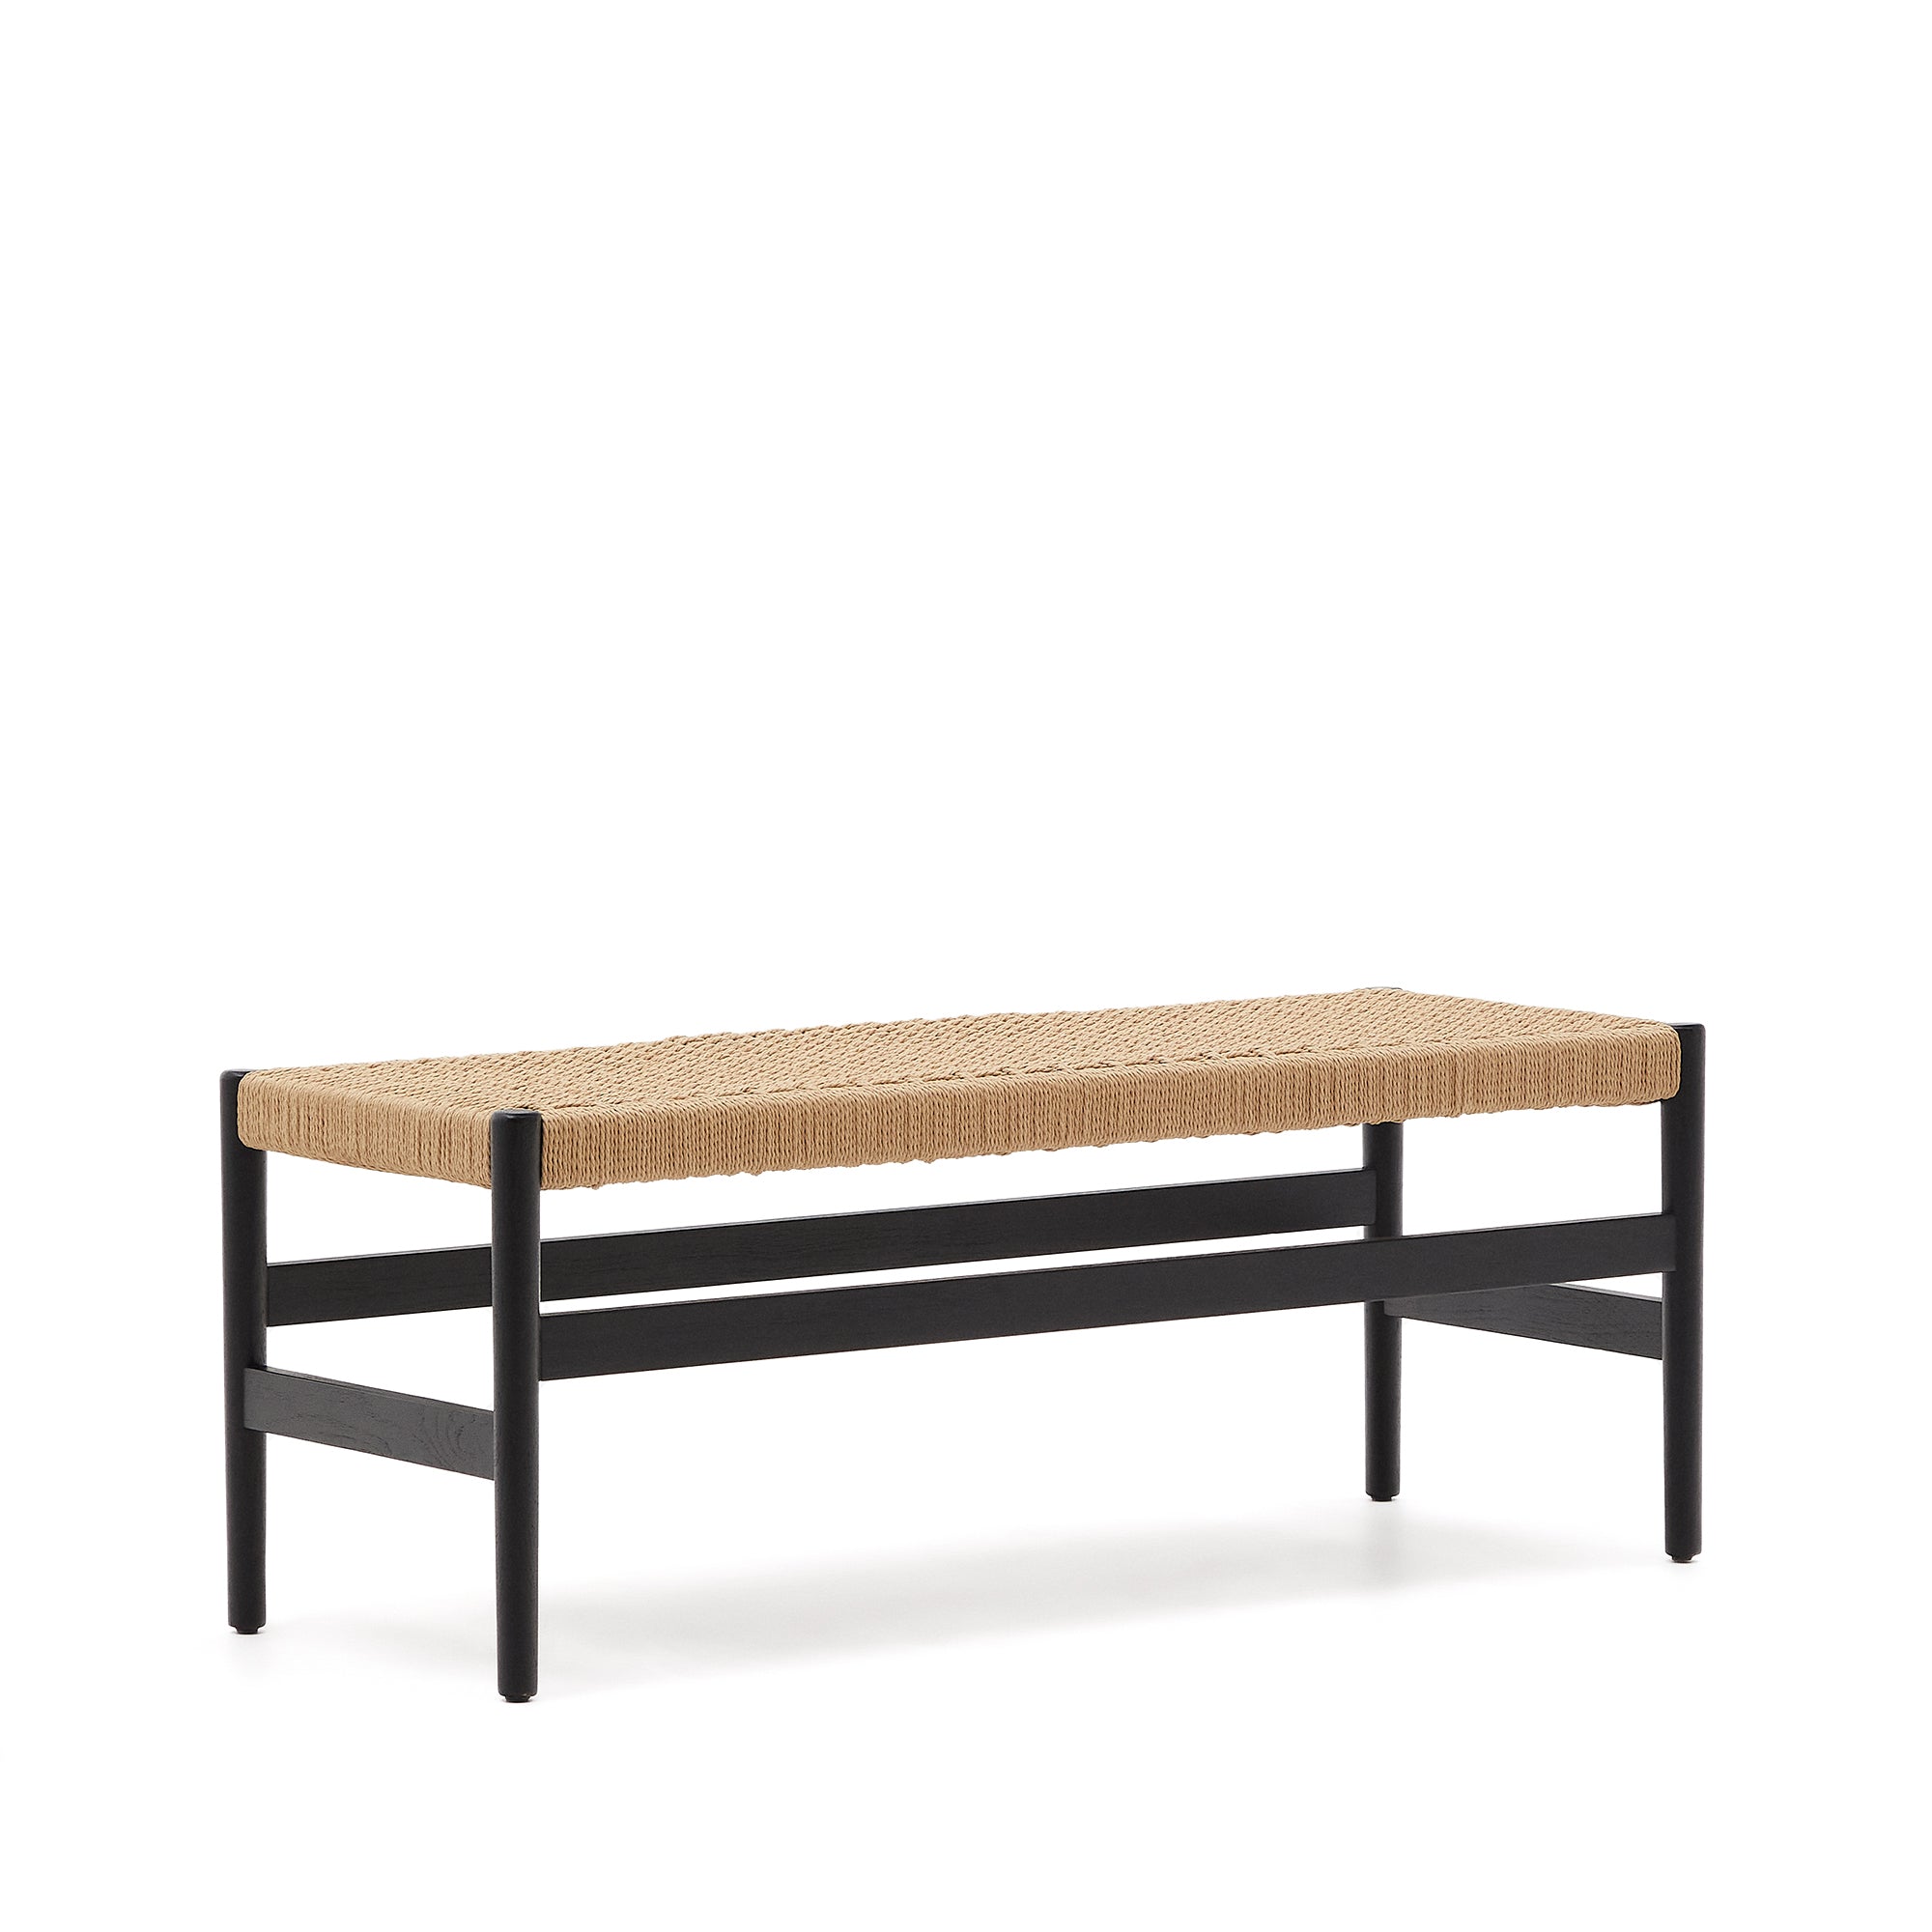 Zaide bench, solid oak, black finish and rope seat, 120 cm, 100% FSC